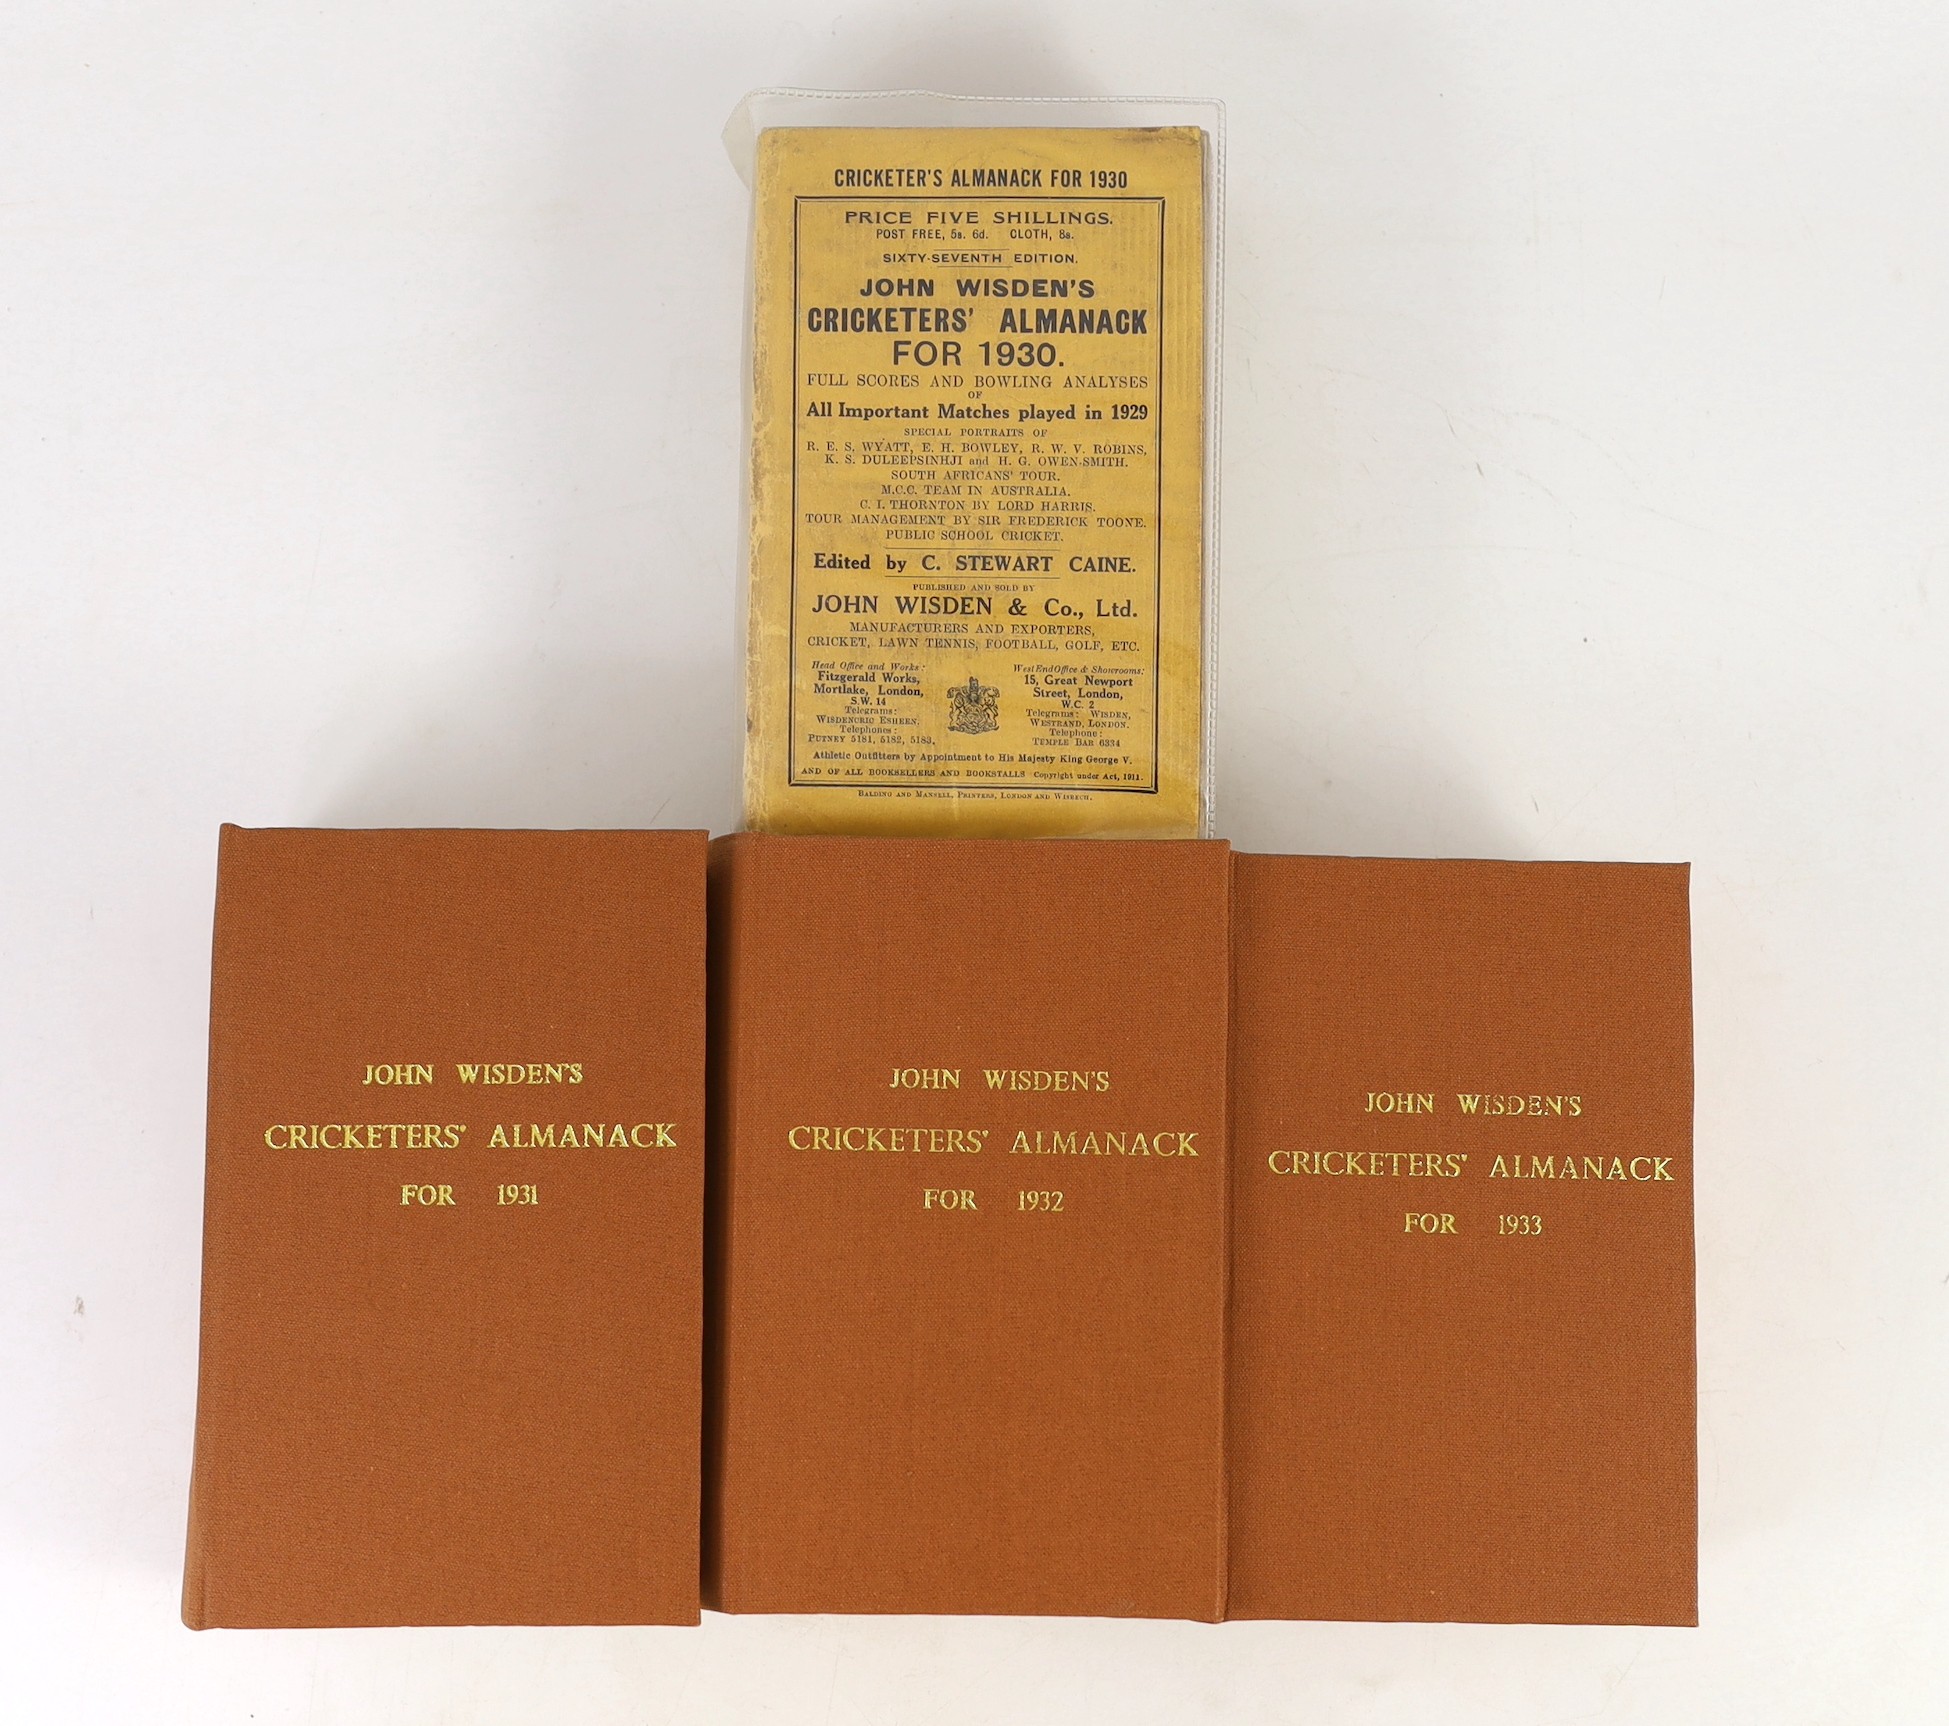 Wisden, John - Cricketers’ Almanack for the years 1930 (67th edition) -1938 (75th edition), all rebound brown cloth gilt (excepting issues for 1930 and 1935-36) and retaining original paper wrappers (bar 1938 issue, an o